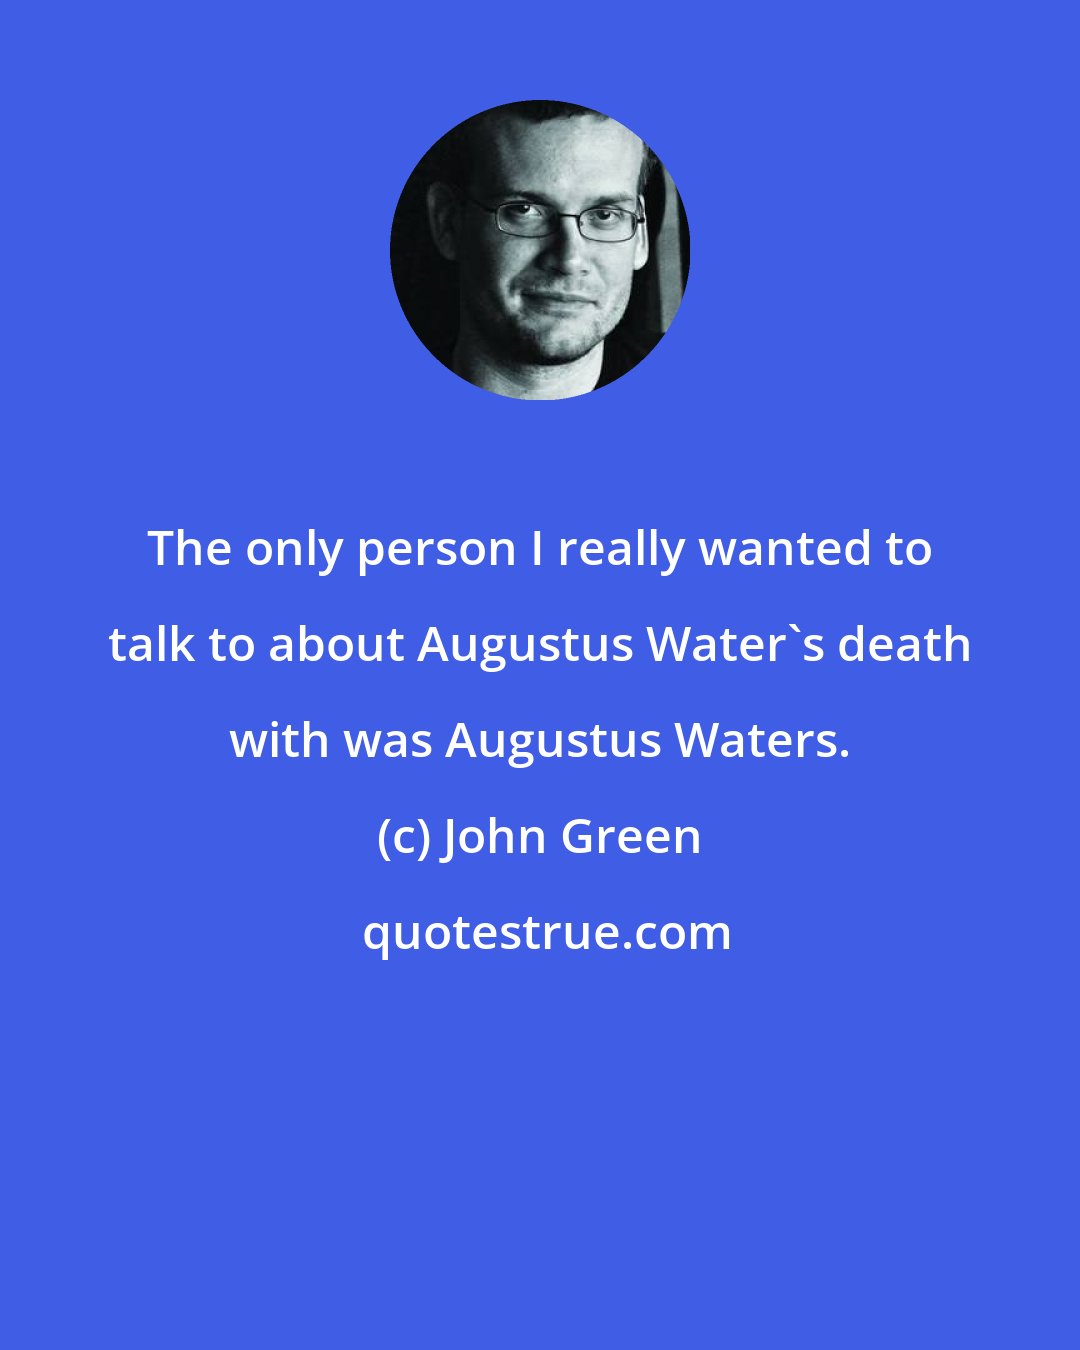 John Green: The only person I really wanted to talk to about Augustus Water's death with was Augustus Waters.